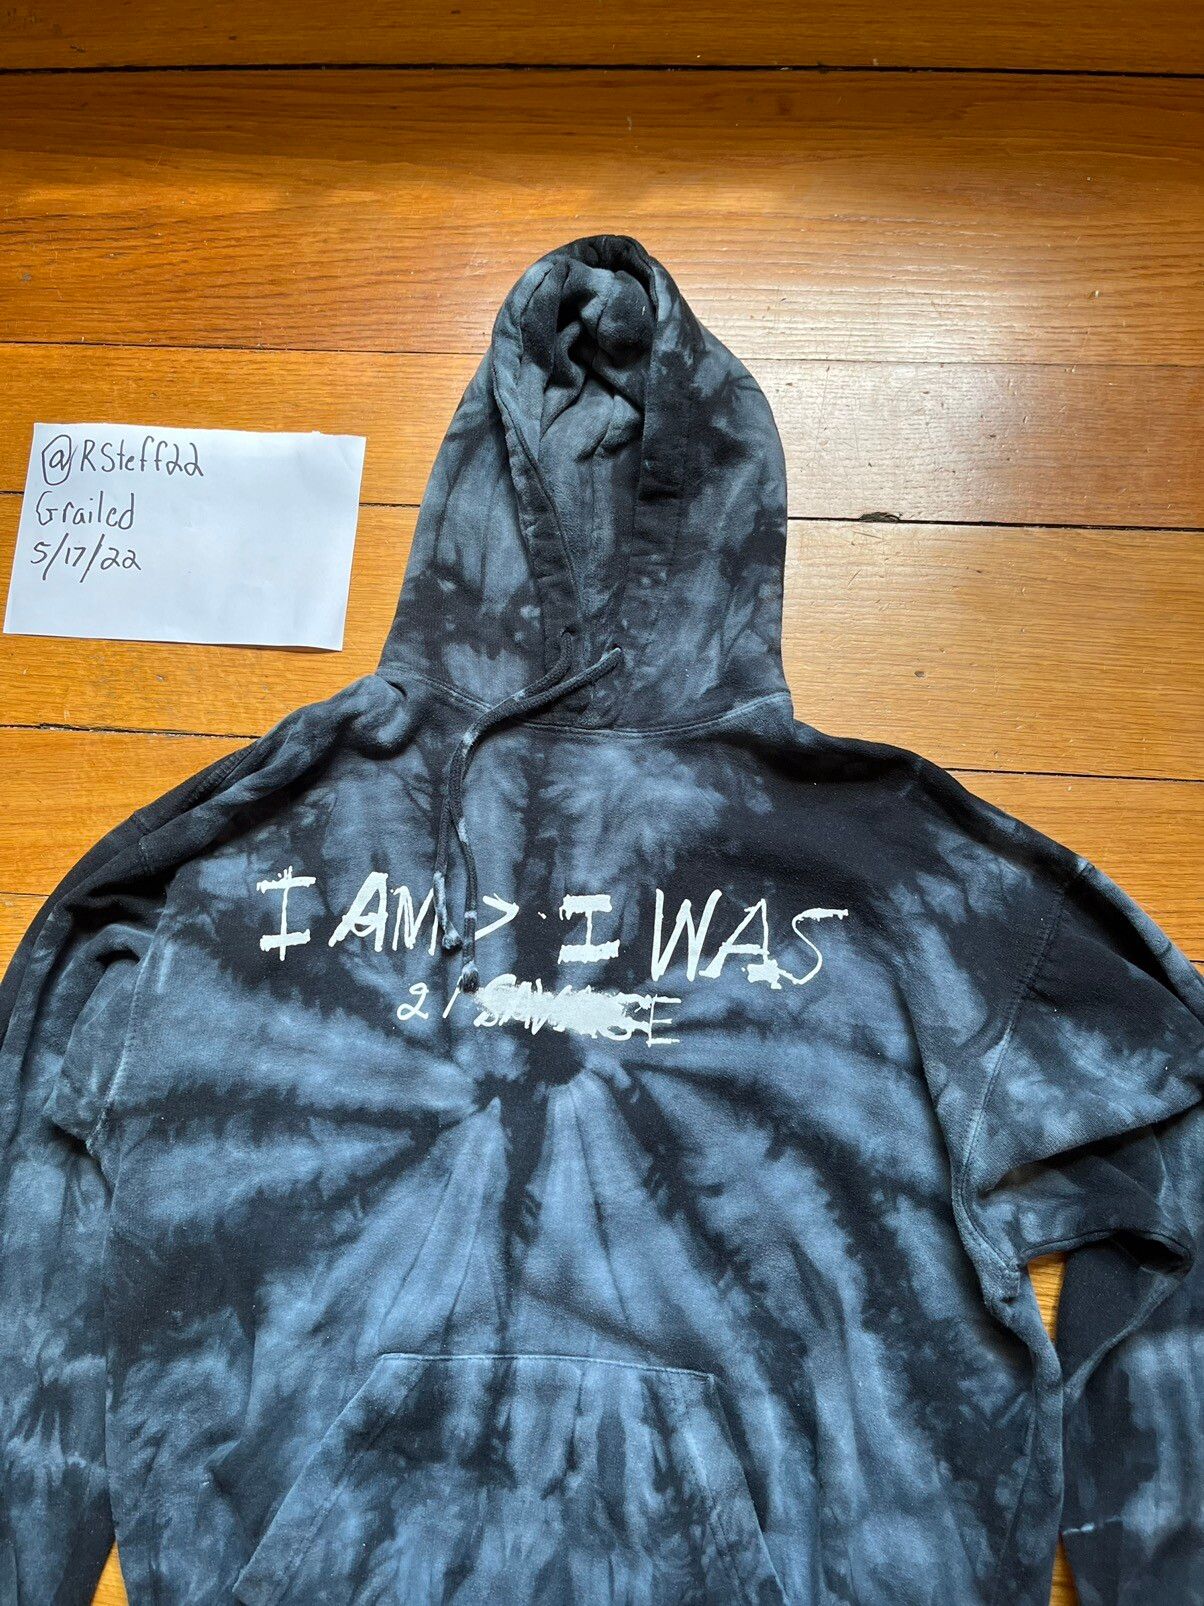 Streetwear 21 SAVAGE I AM> I WAS CONCERT MERCH Size US M / EU 48-50 / 2 - 2 Preview